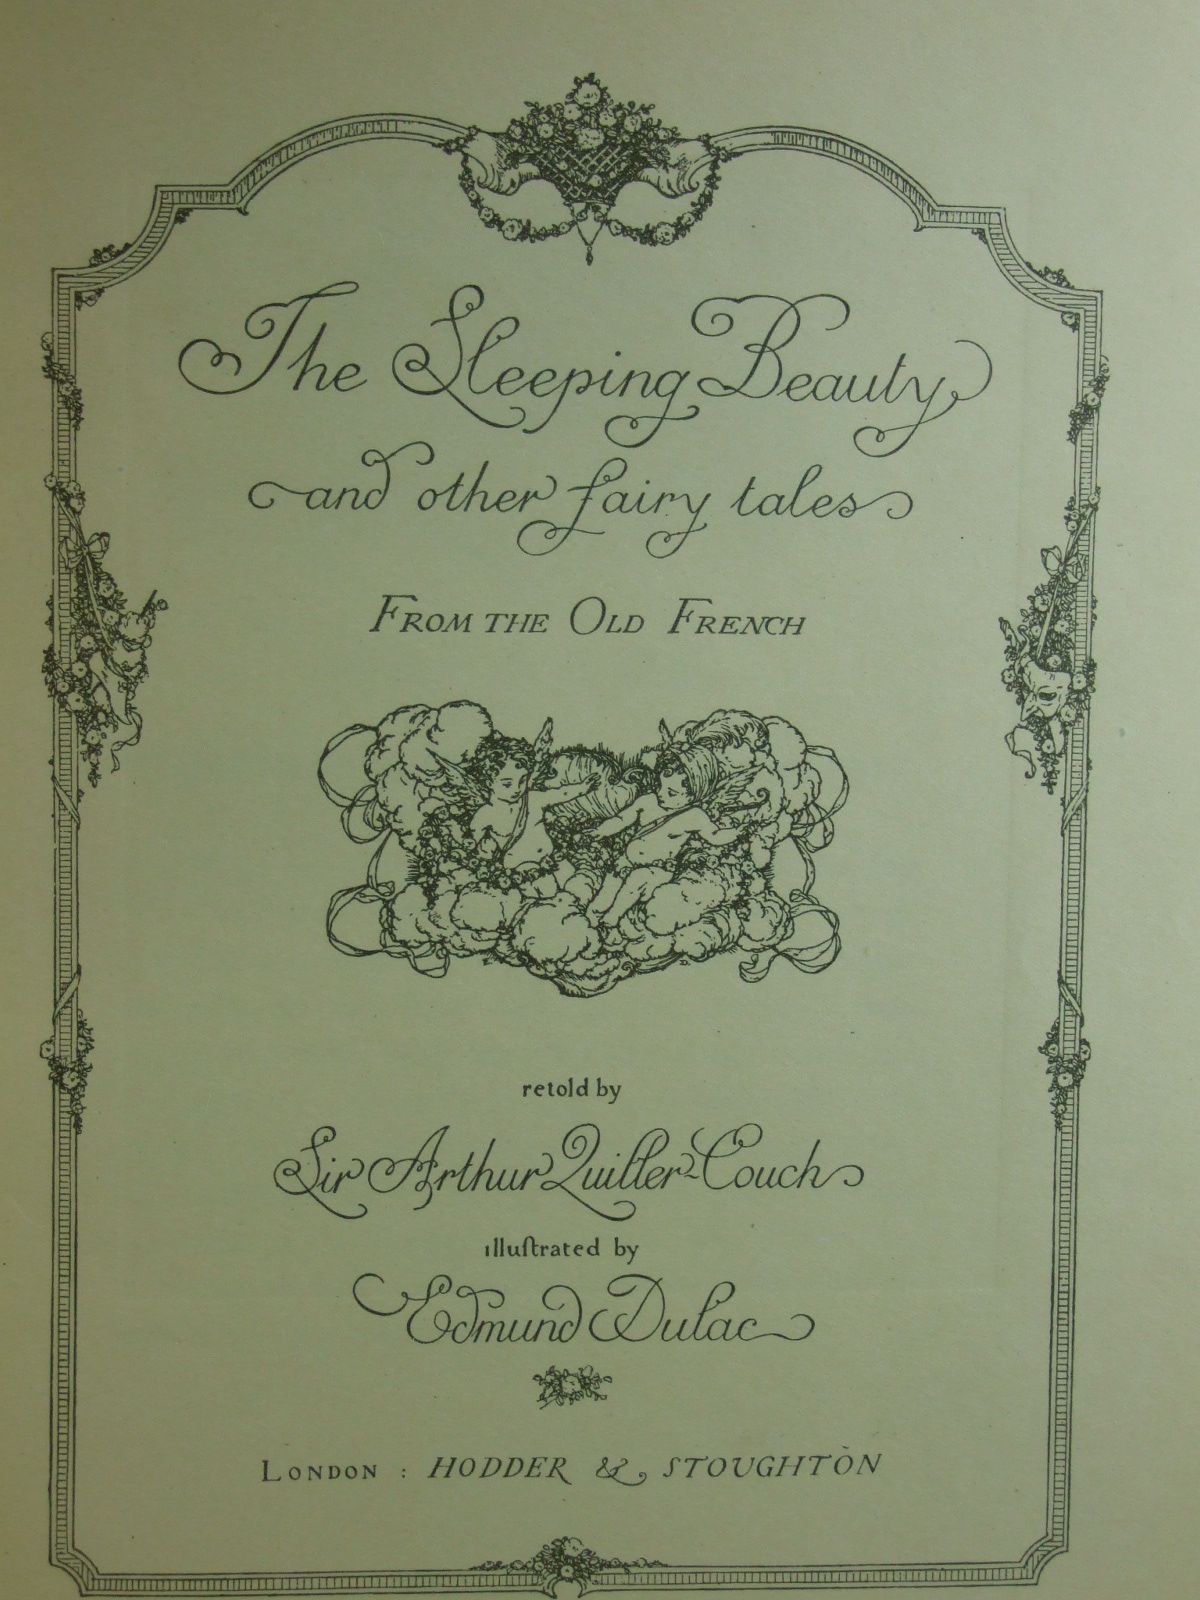 Photo of THE SLEEPING BEAUTY & OTHER FAIRY TALES FROM THE OLD FRENCH written by Quiller-Couch, Arthur illustrated by Dulac, Edmund published by Hodder & Stoughton (STOCK CODE: 1108296)  for sale by Stella & Rose's Books